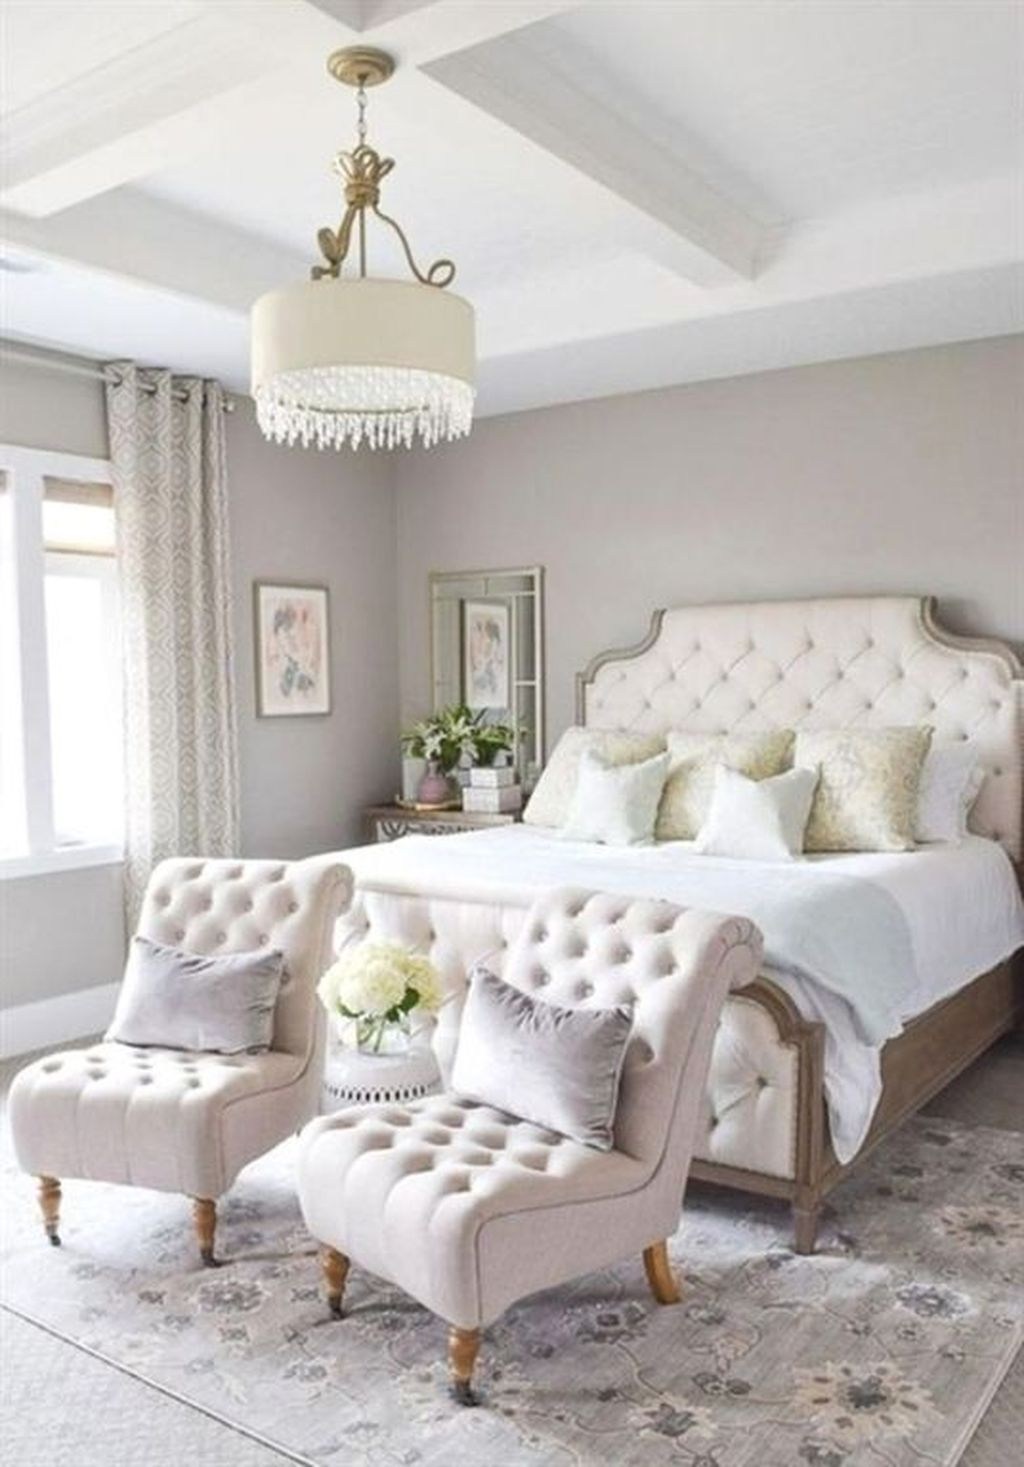 50 Gorgeous Romantic Master Bedroom Will Dreaming - TREND4HOMY